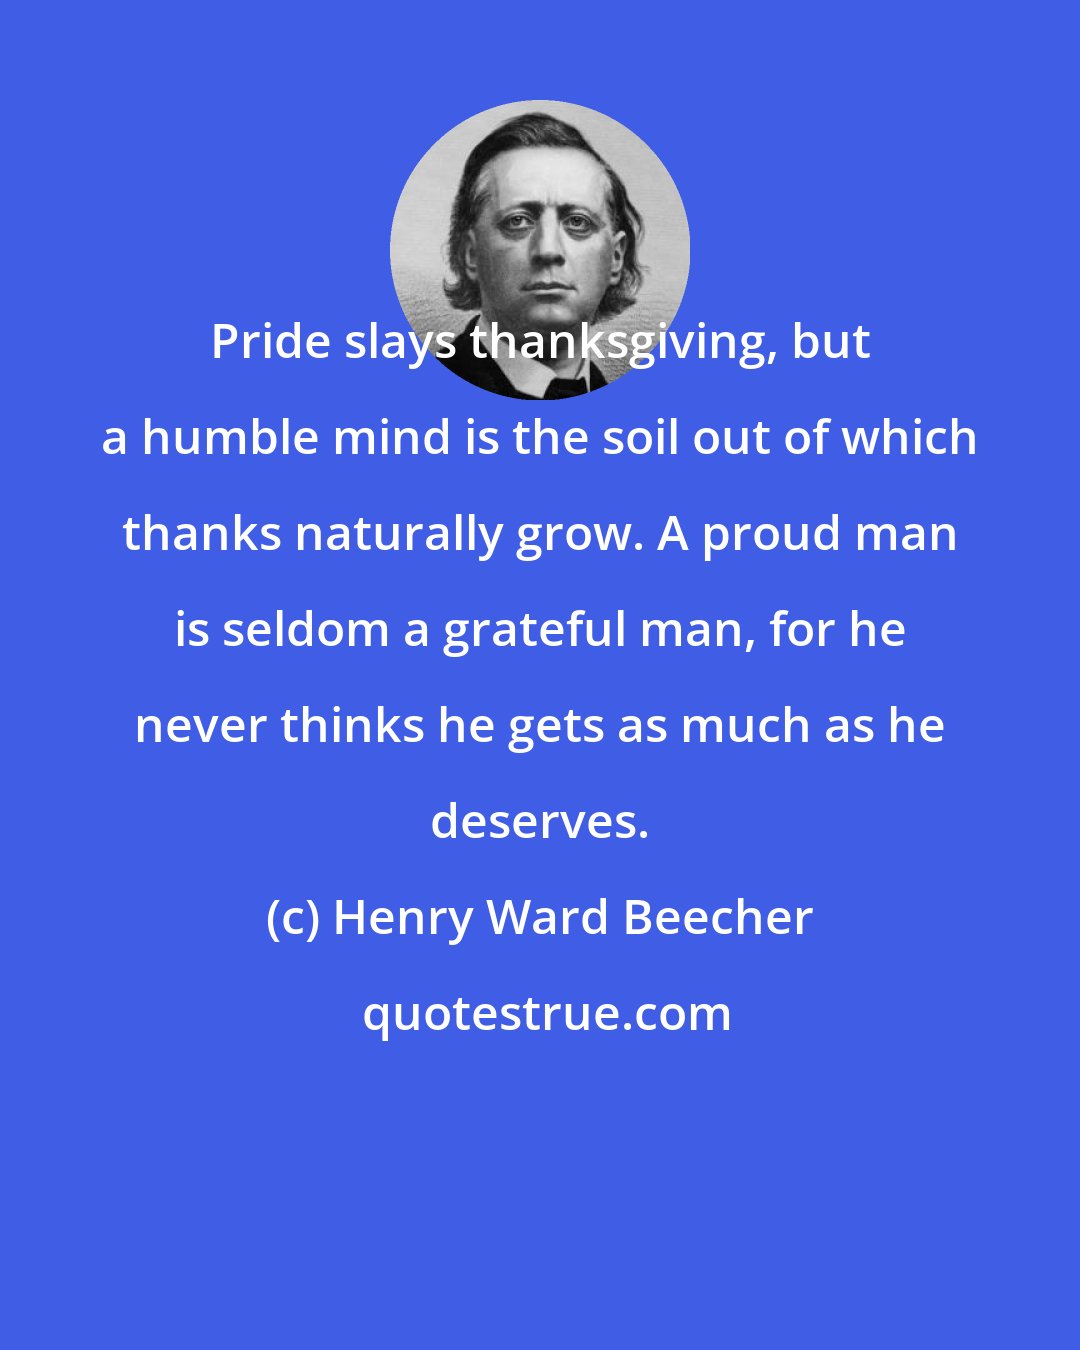 Henry Ward Beecher: Pride slays thanksgiving, but a humble mind is the soil out of which thanks naturally grow. A proud man is seldom a grateful man, for he never thinks he gets as much as he deserves.